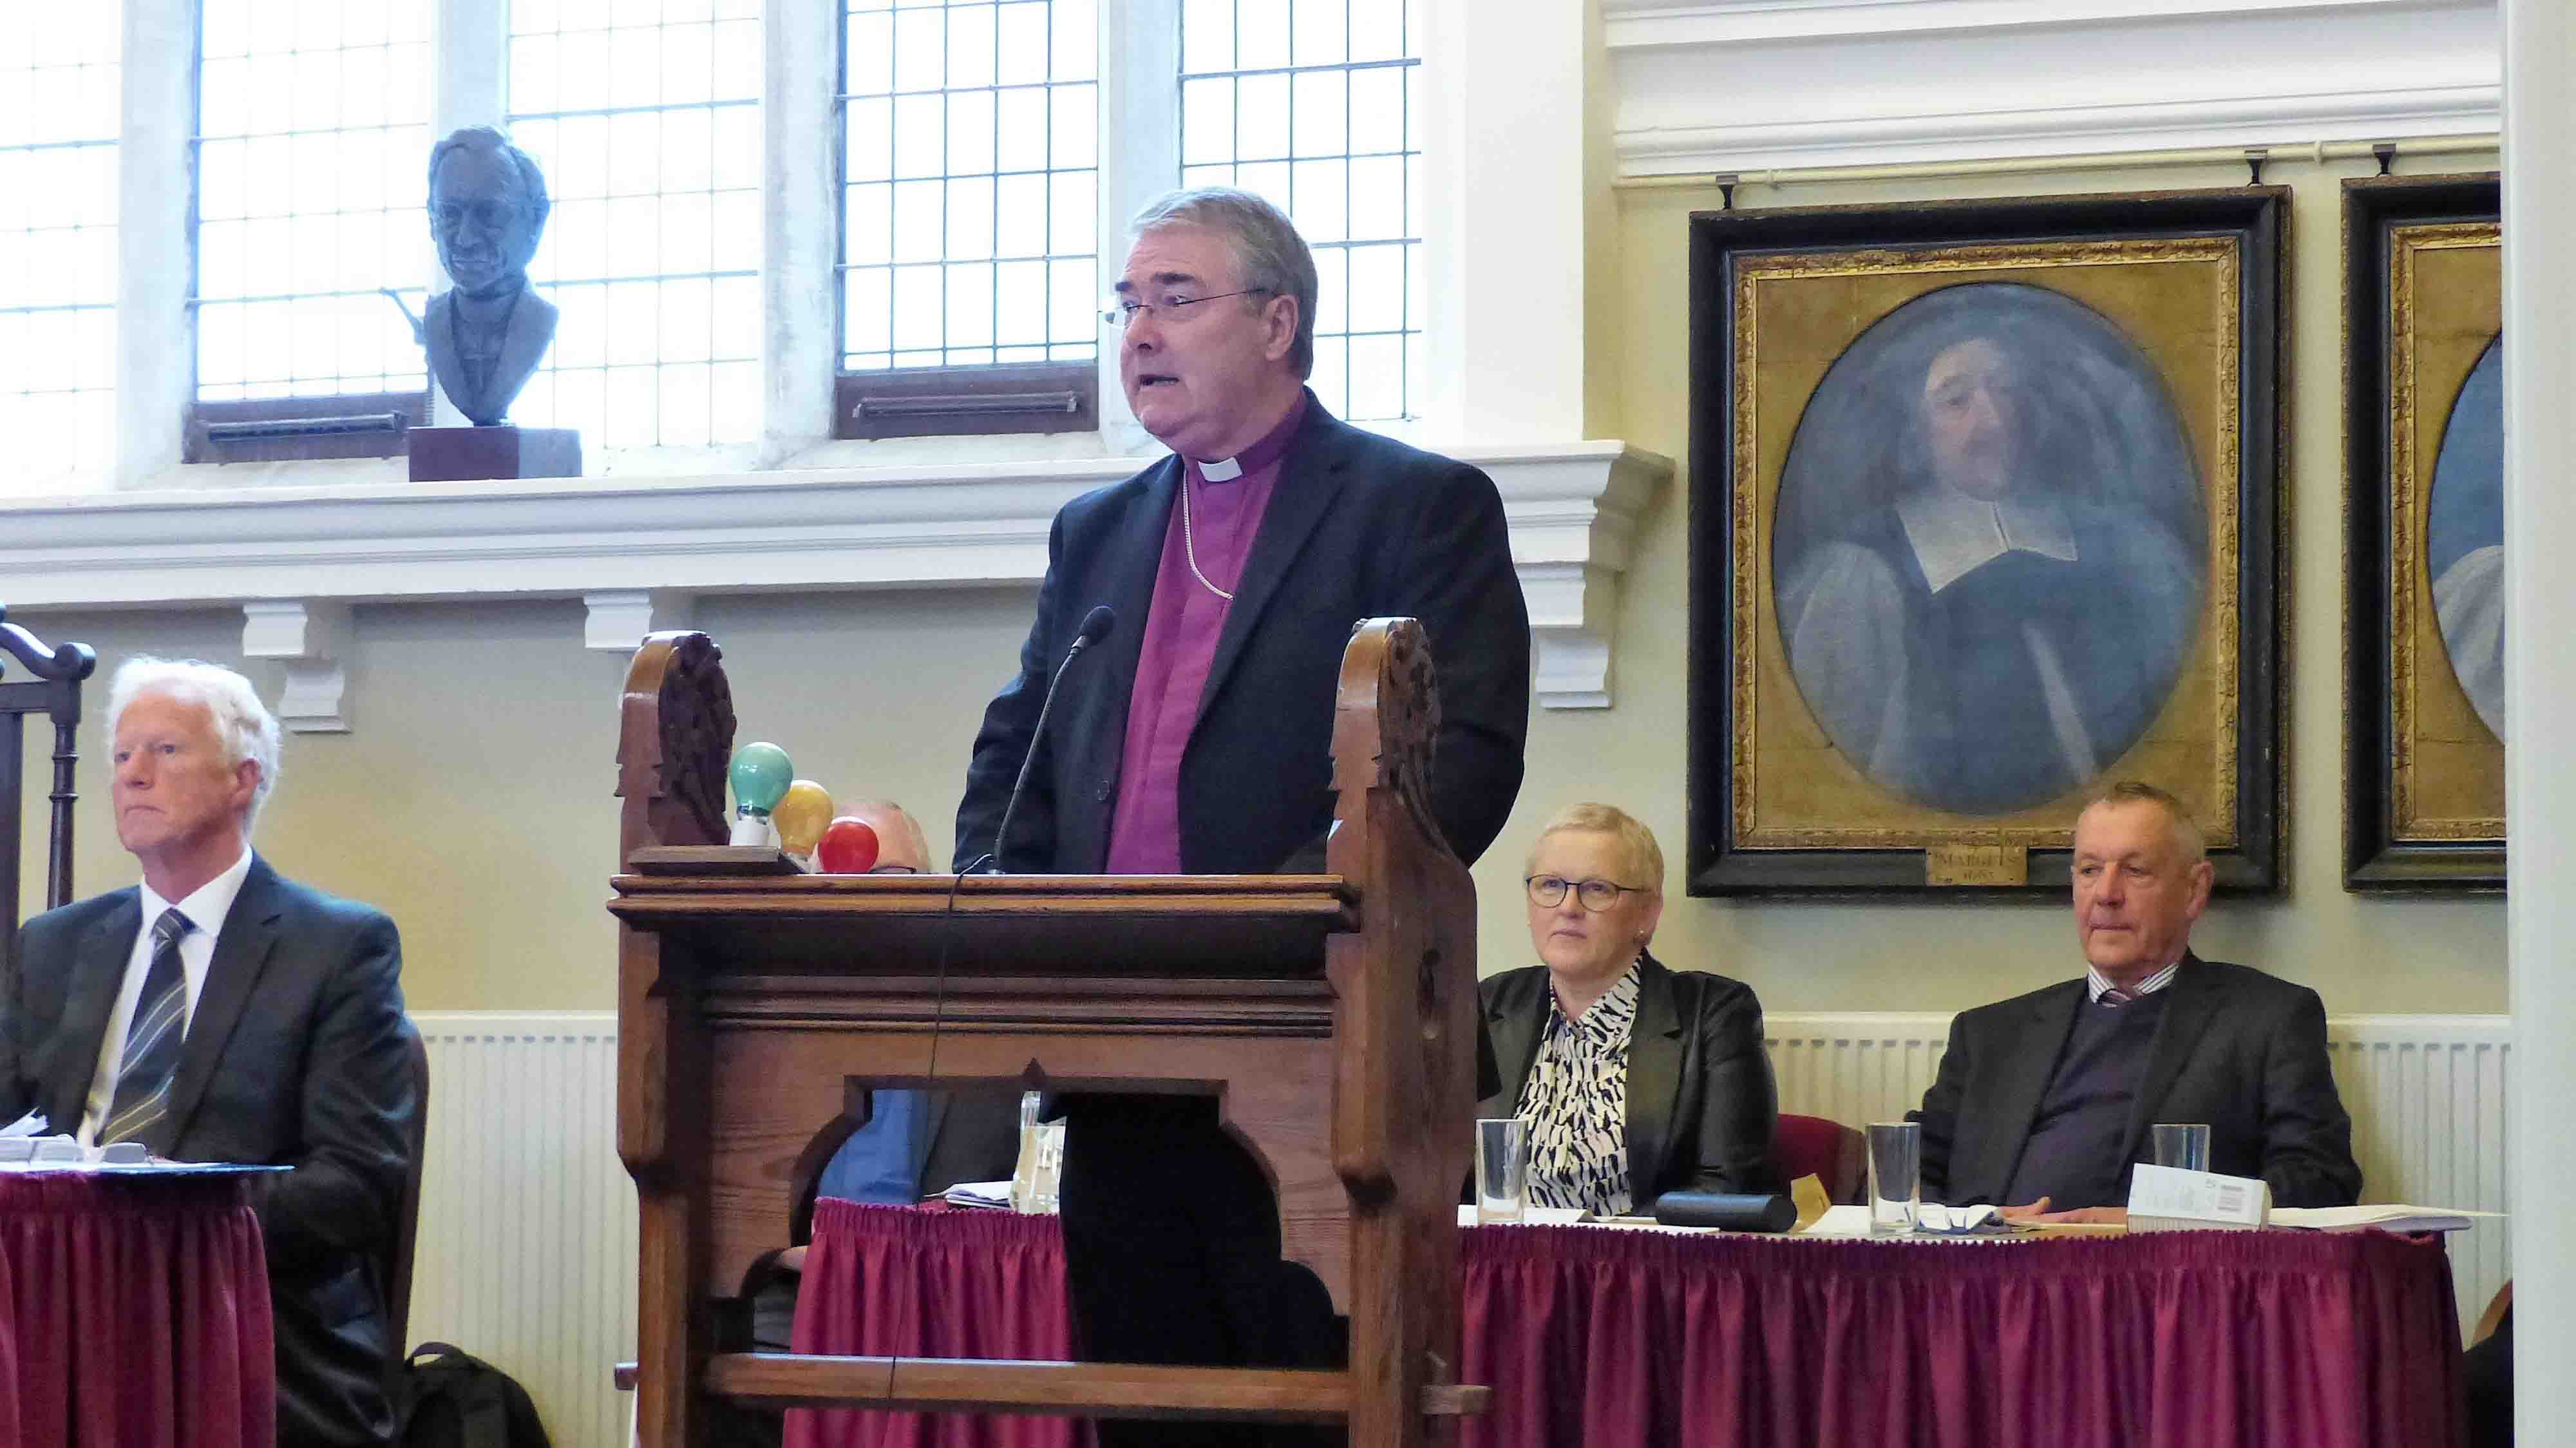 Archbishop John McDowell delivers his Presidential Address.